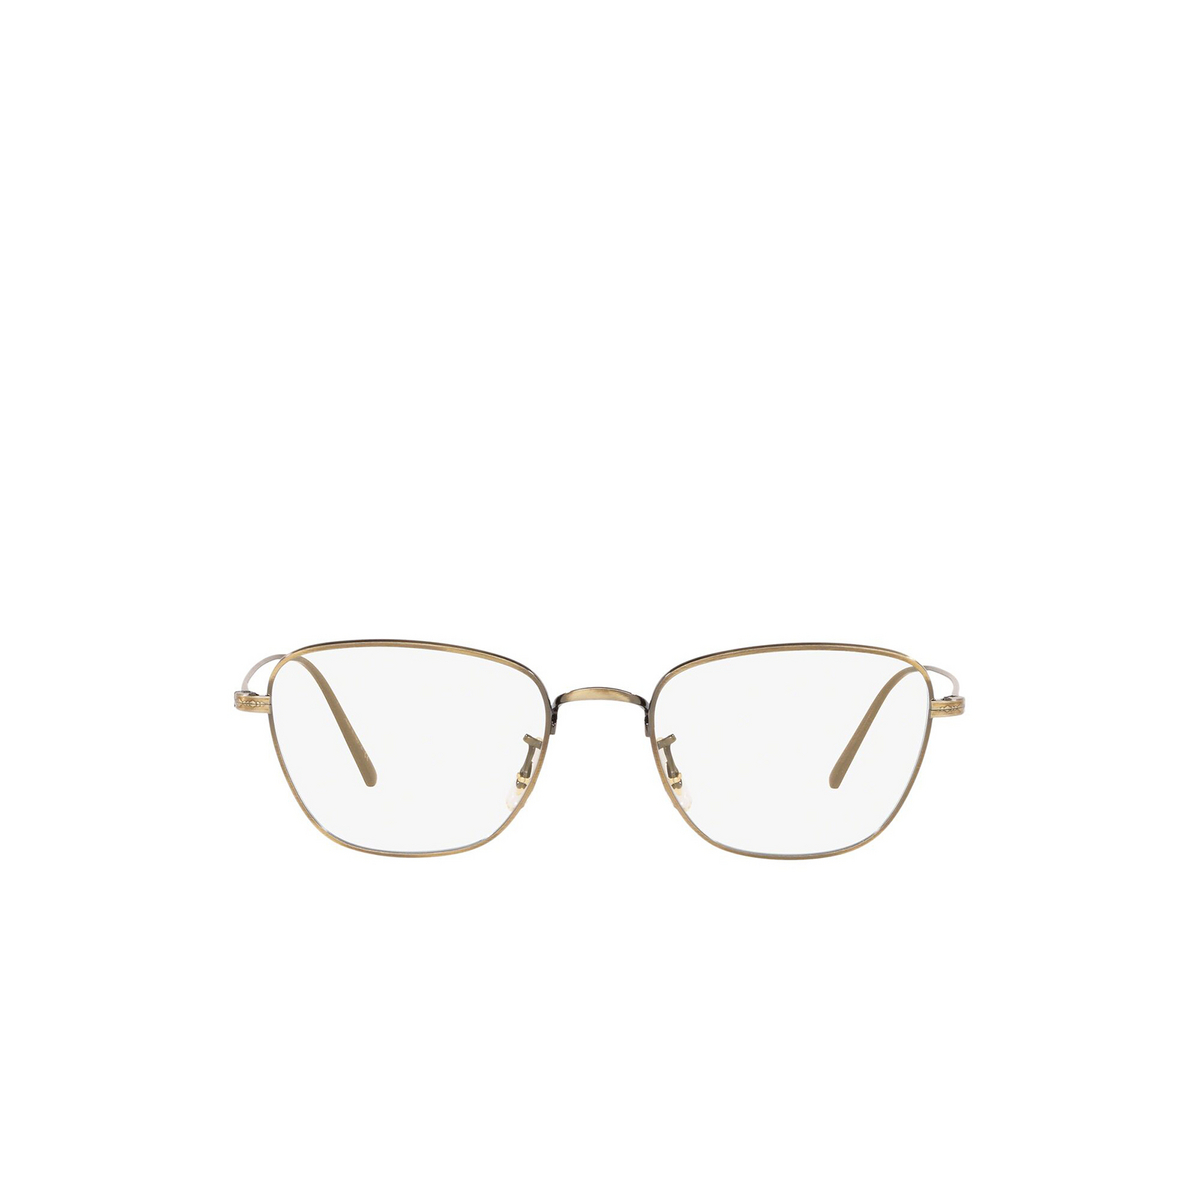 Oliver Peoples® Butterfly Eyeglasses: Suliane OV1254 color Antique Gold 5284 - front view.